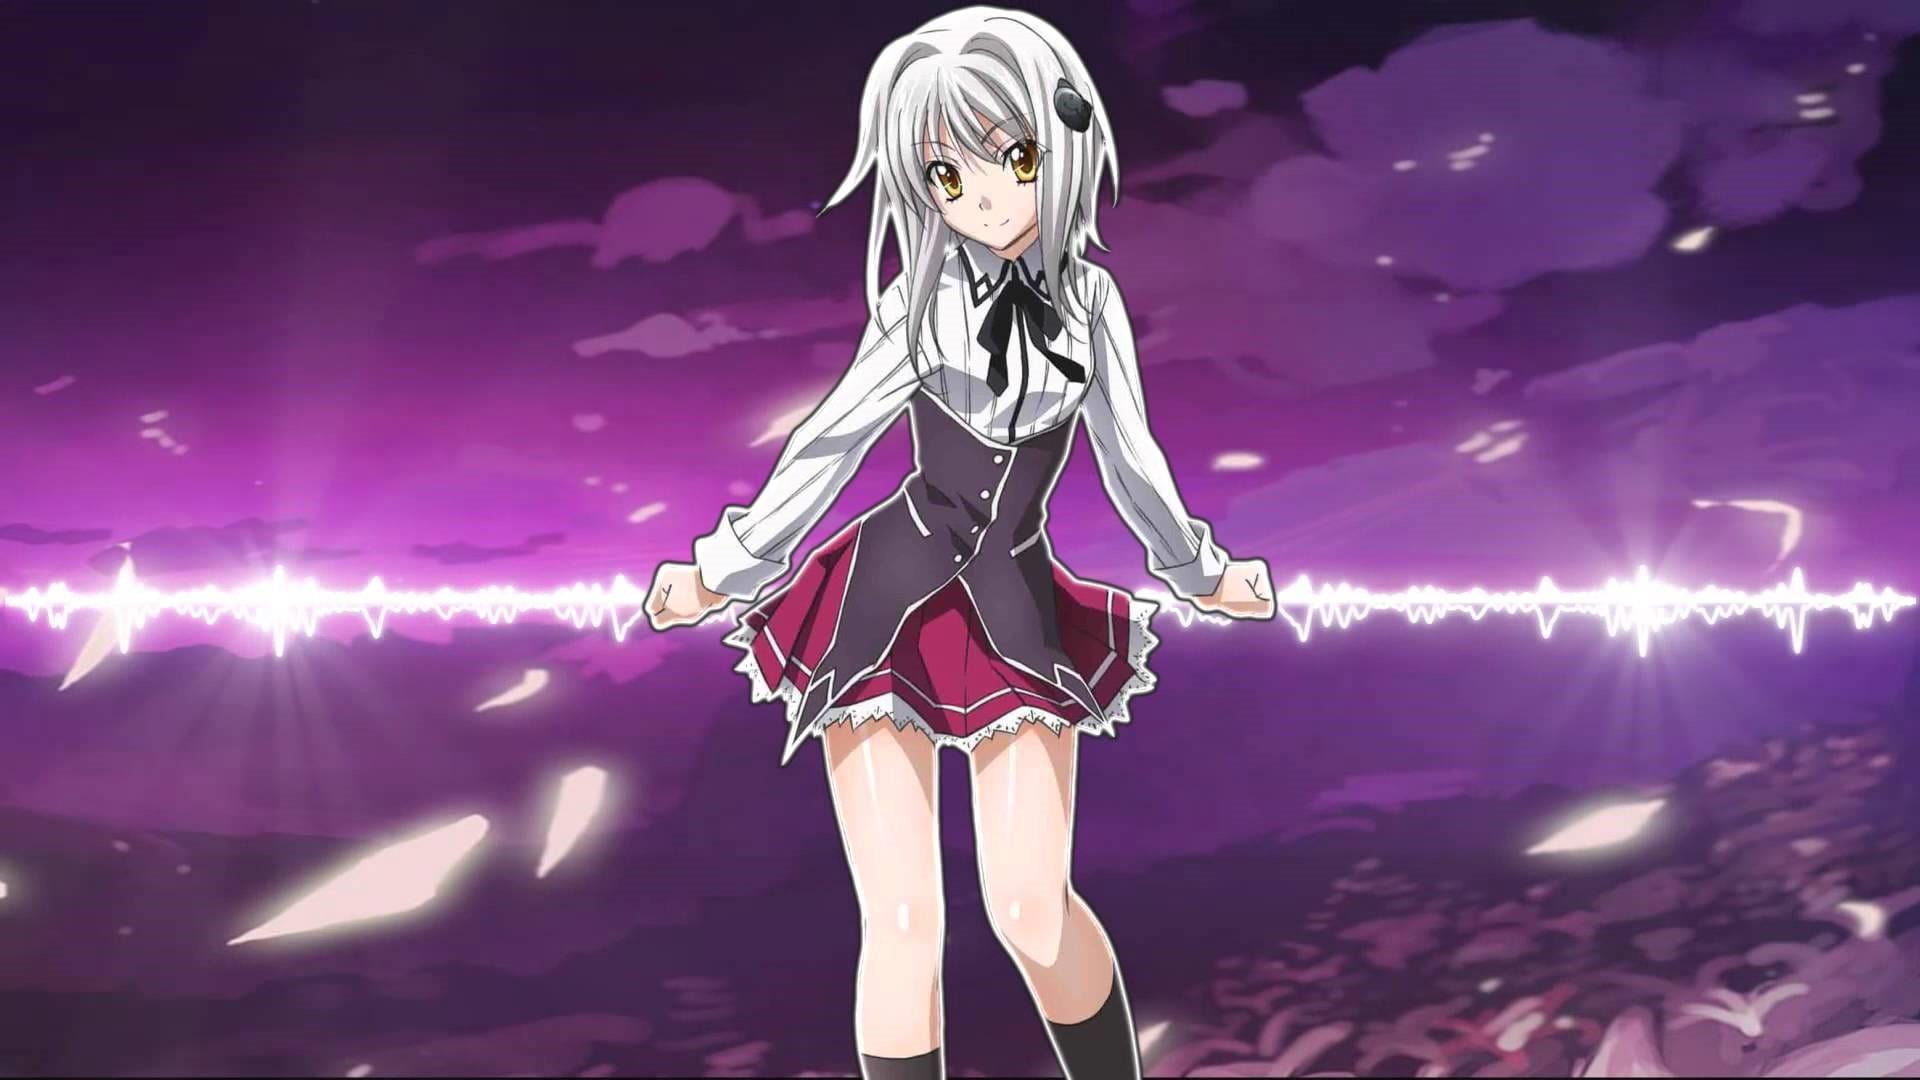 koneko, dxd, highschooldxd, one person, blond hair, young adult